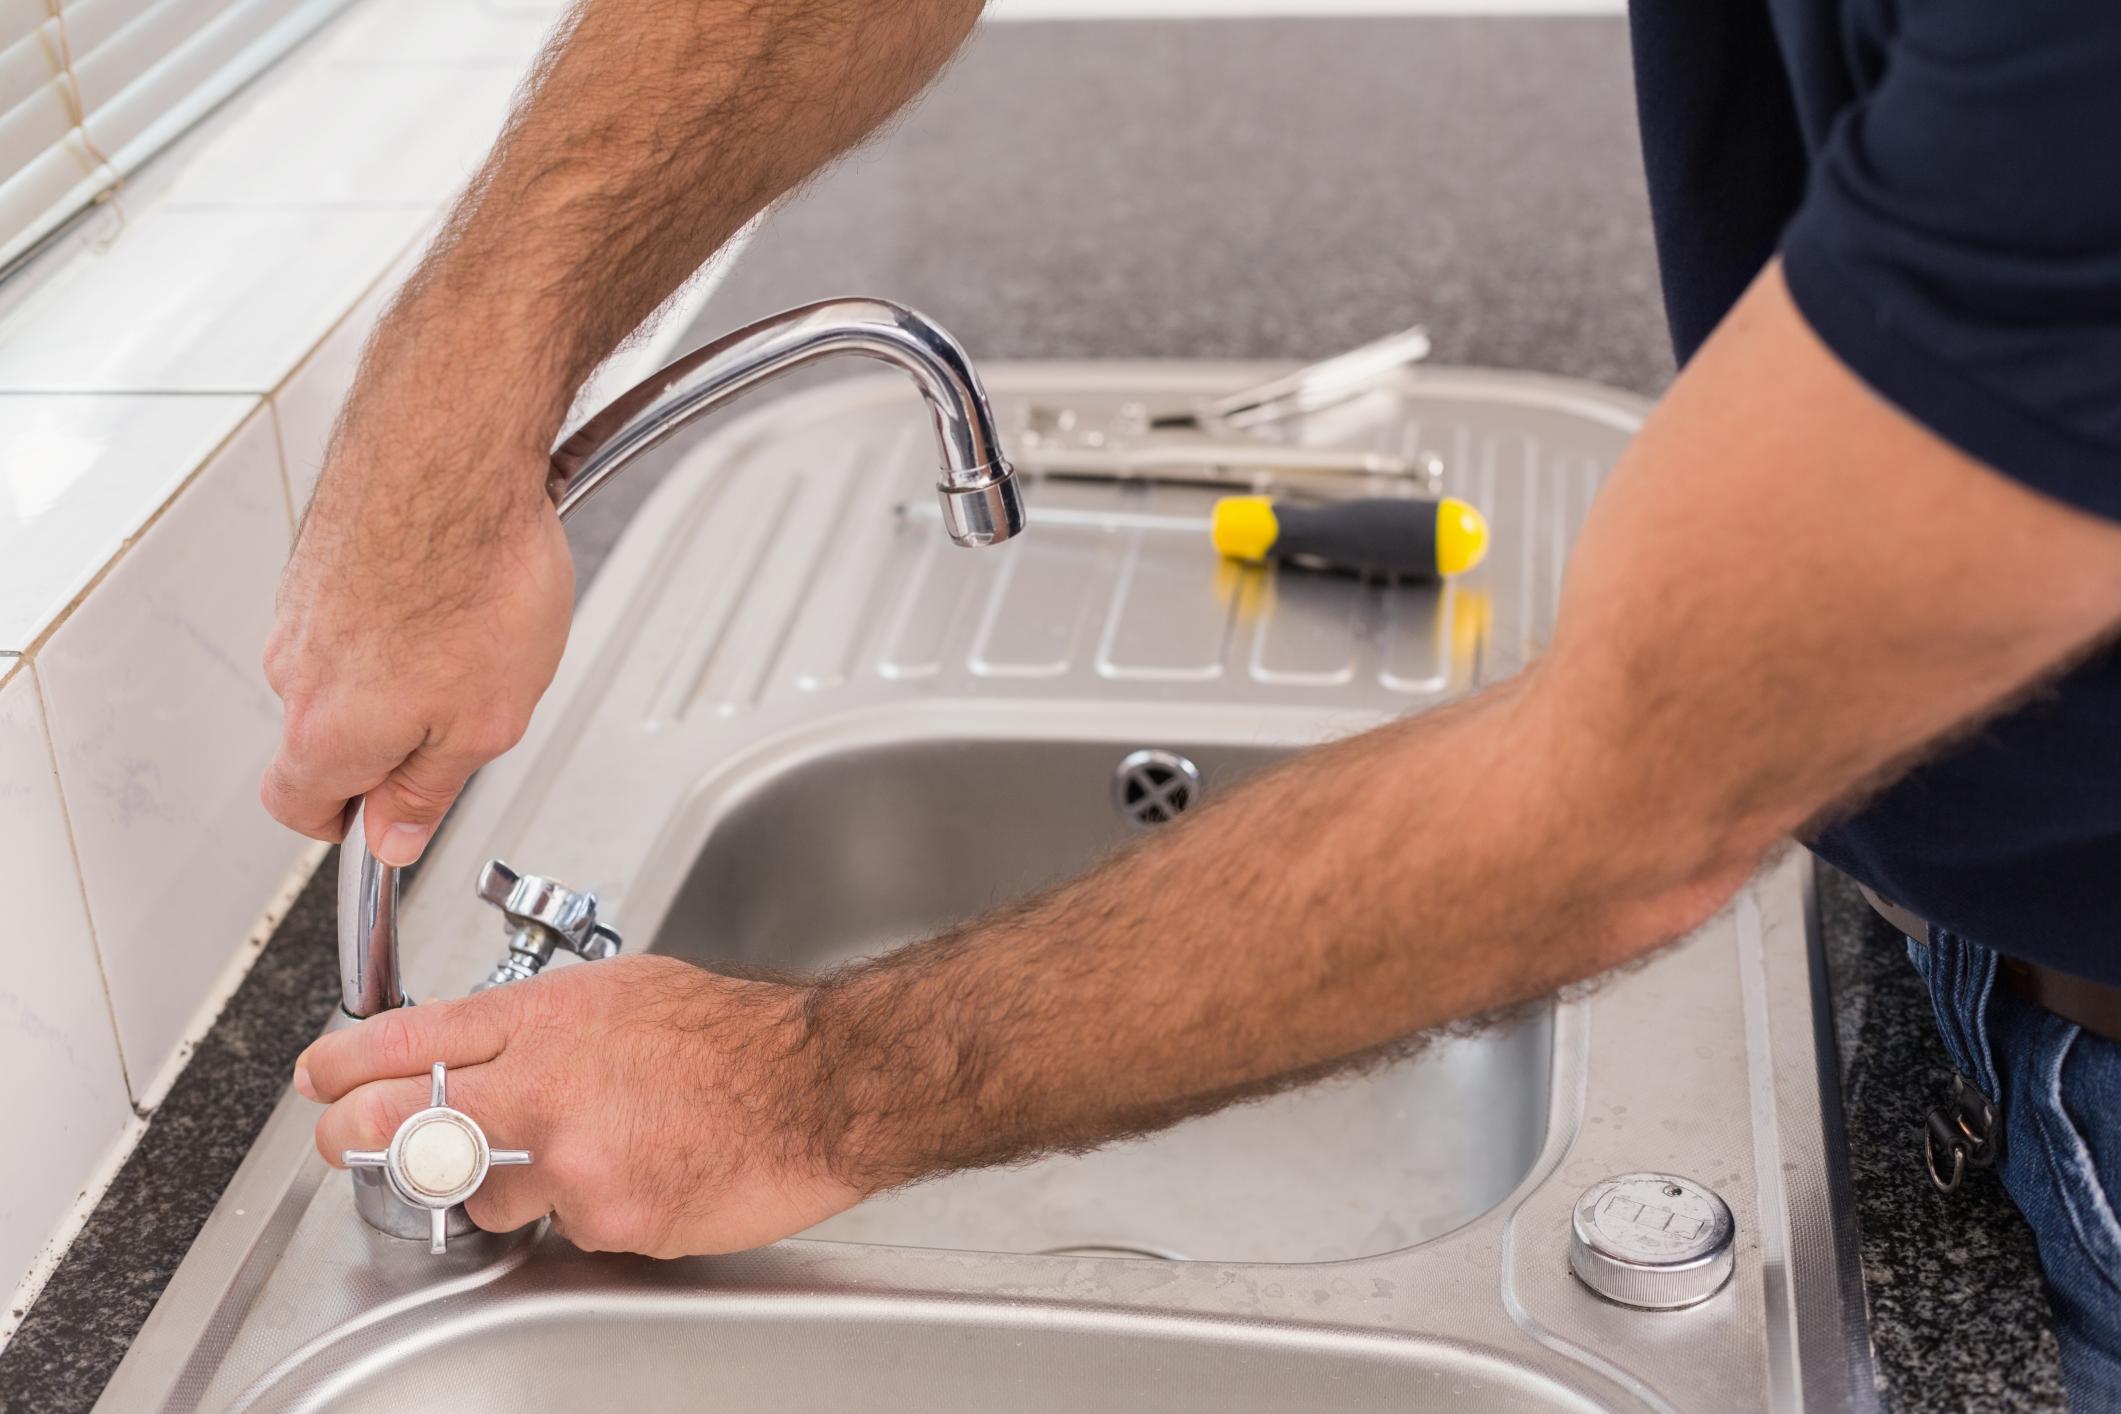 North Bay Plumbers in North Bay Ontario